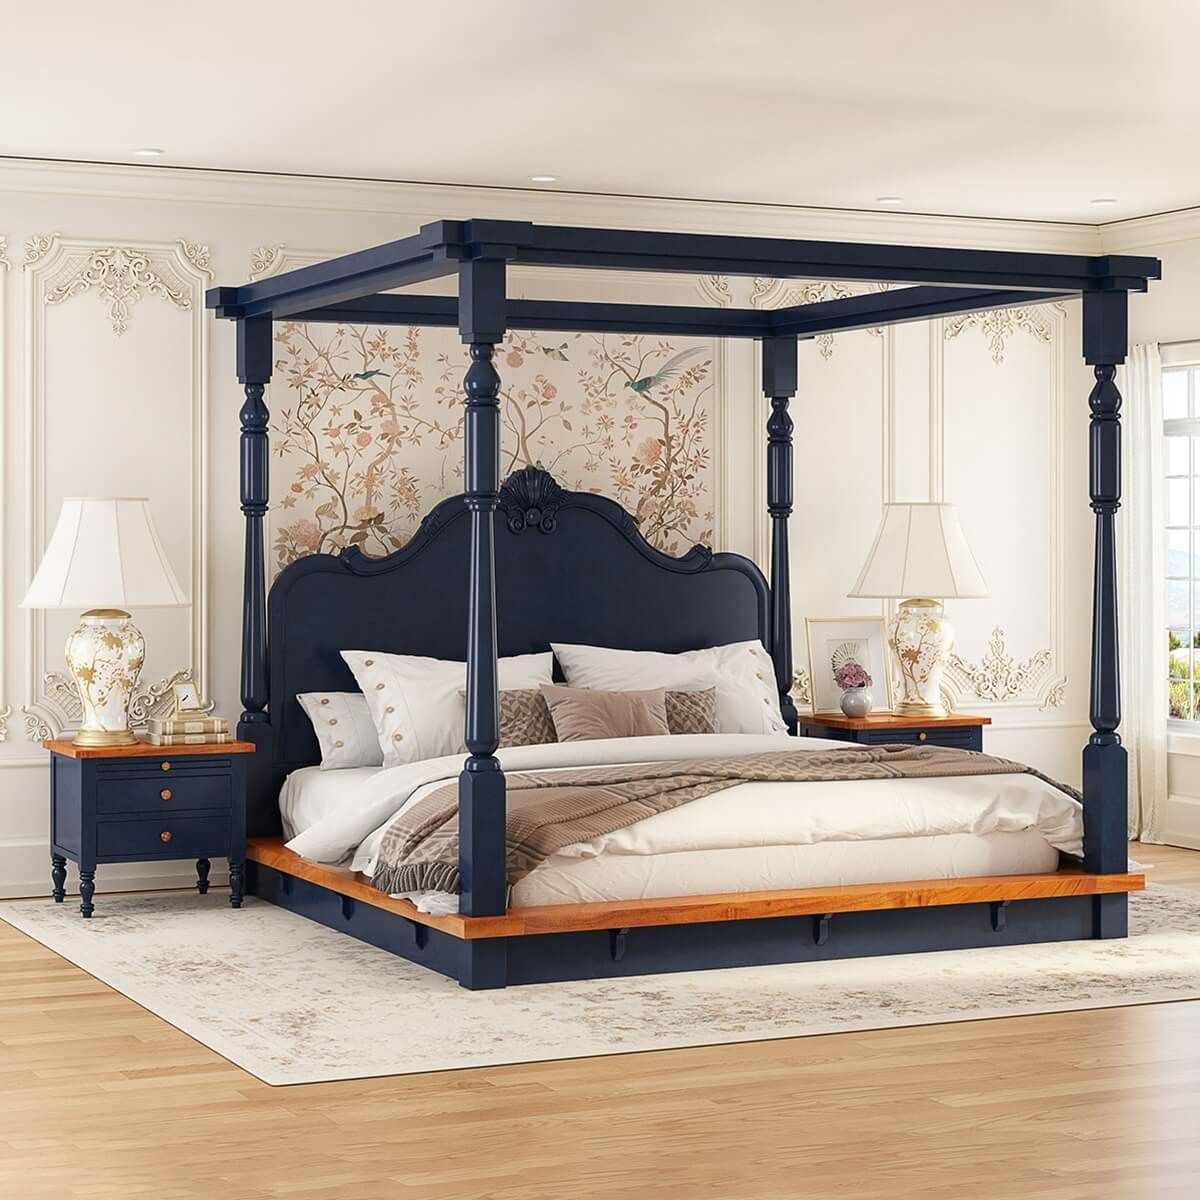 Regal Wooden Canopy Bed Frame: Fit For a King